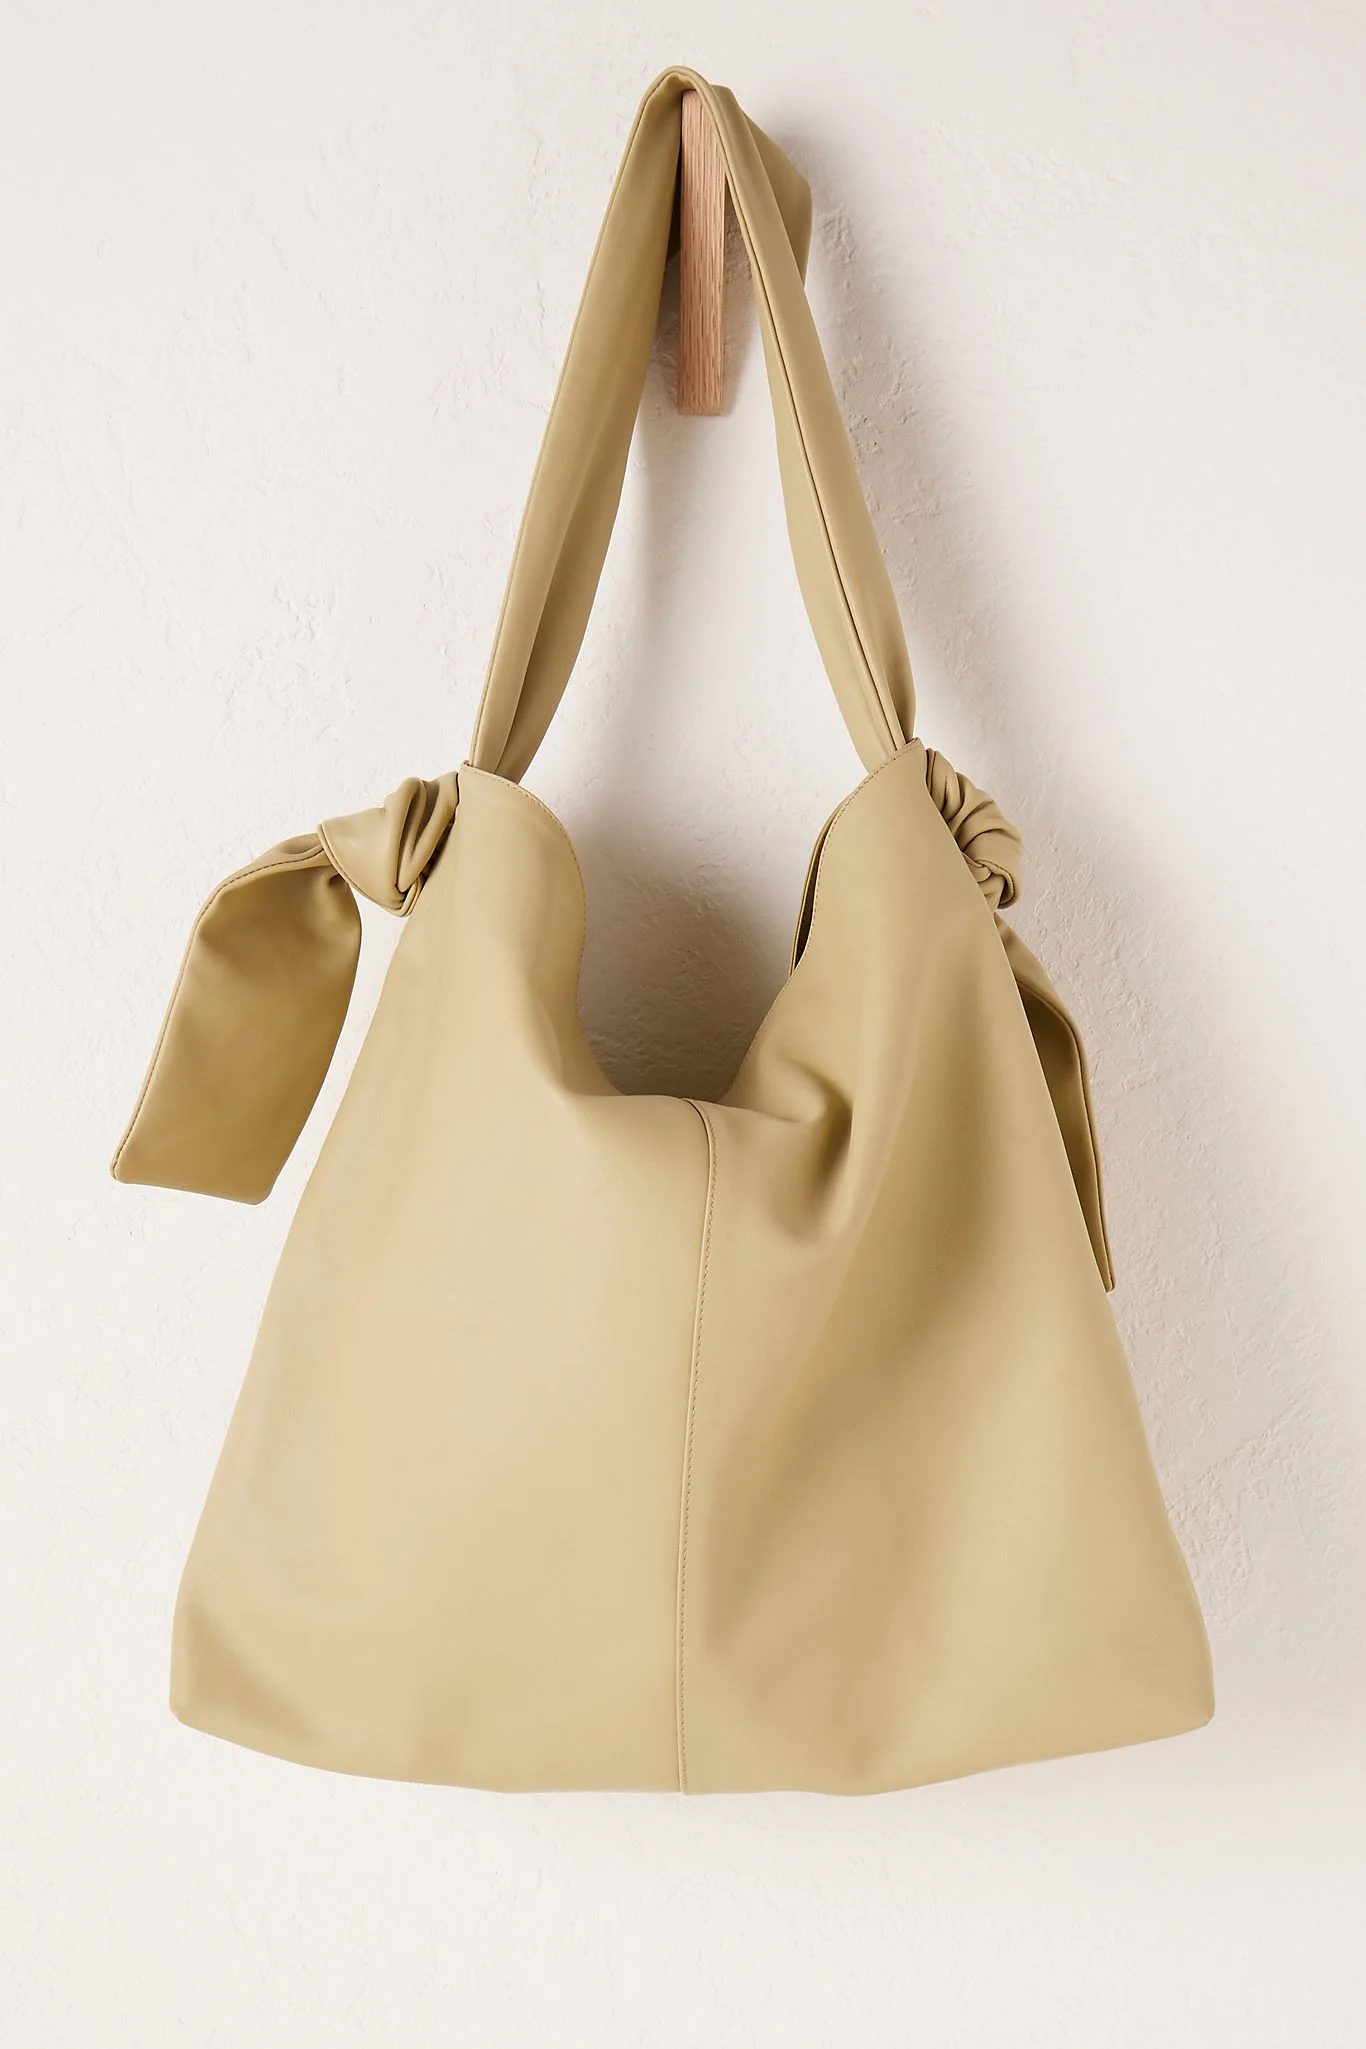 By Anthropologie Slouchy Leather Knotted-Shoulder Bag  Anthropologie Japan  - Women's Clothing, Accessories & Home